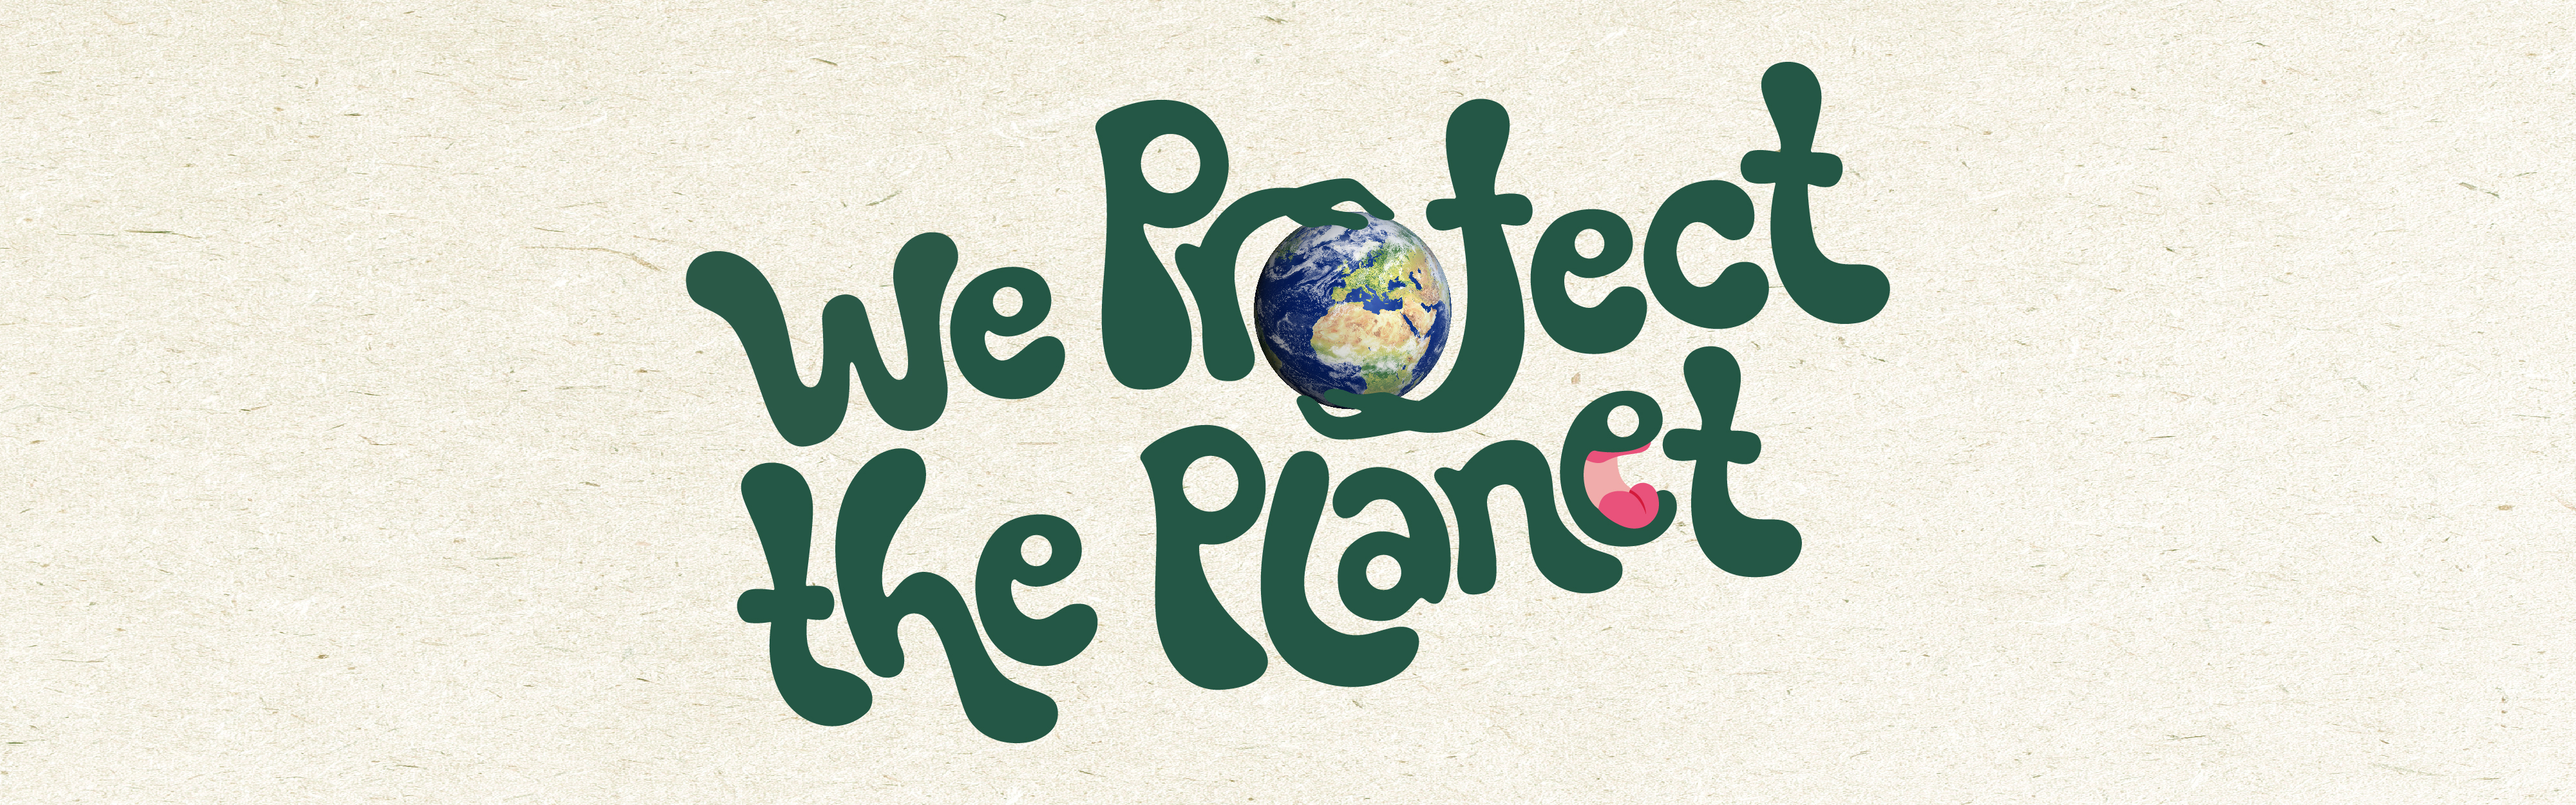 We protect the planet text with two hands holding a globe. Text is dark green and a beige textured background